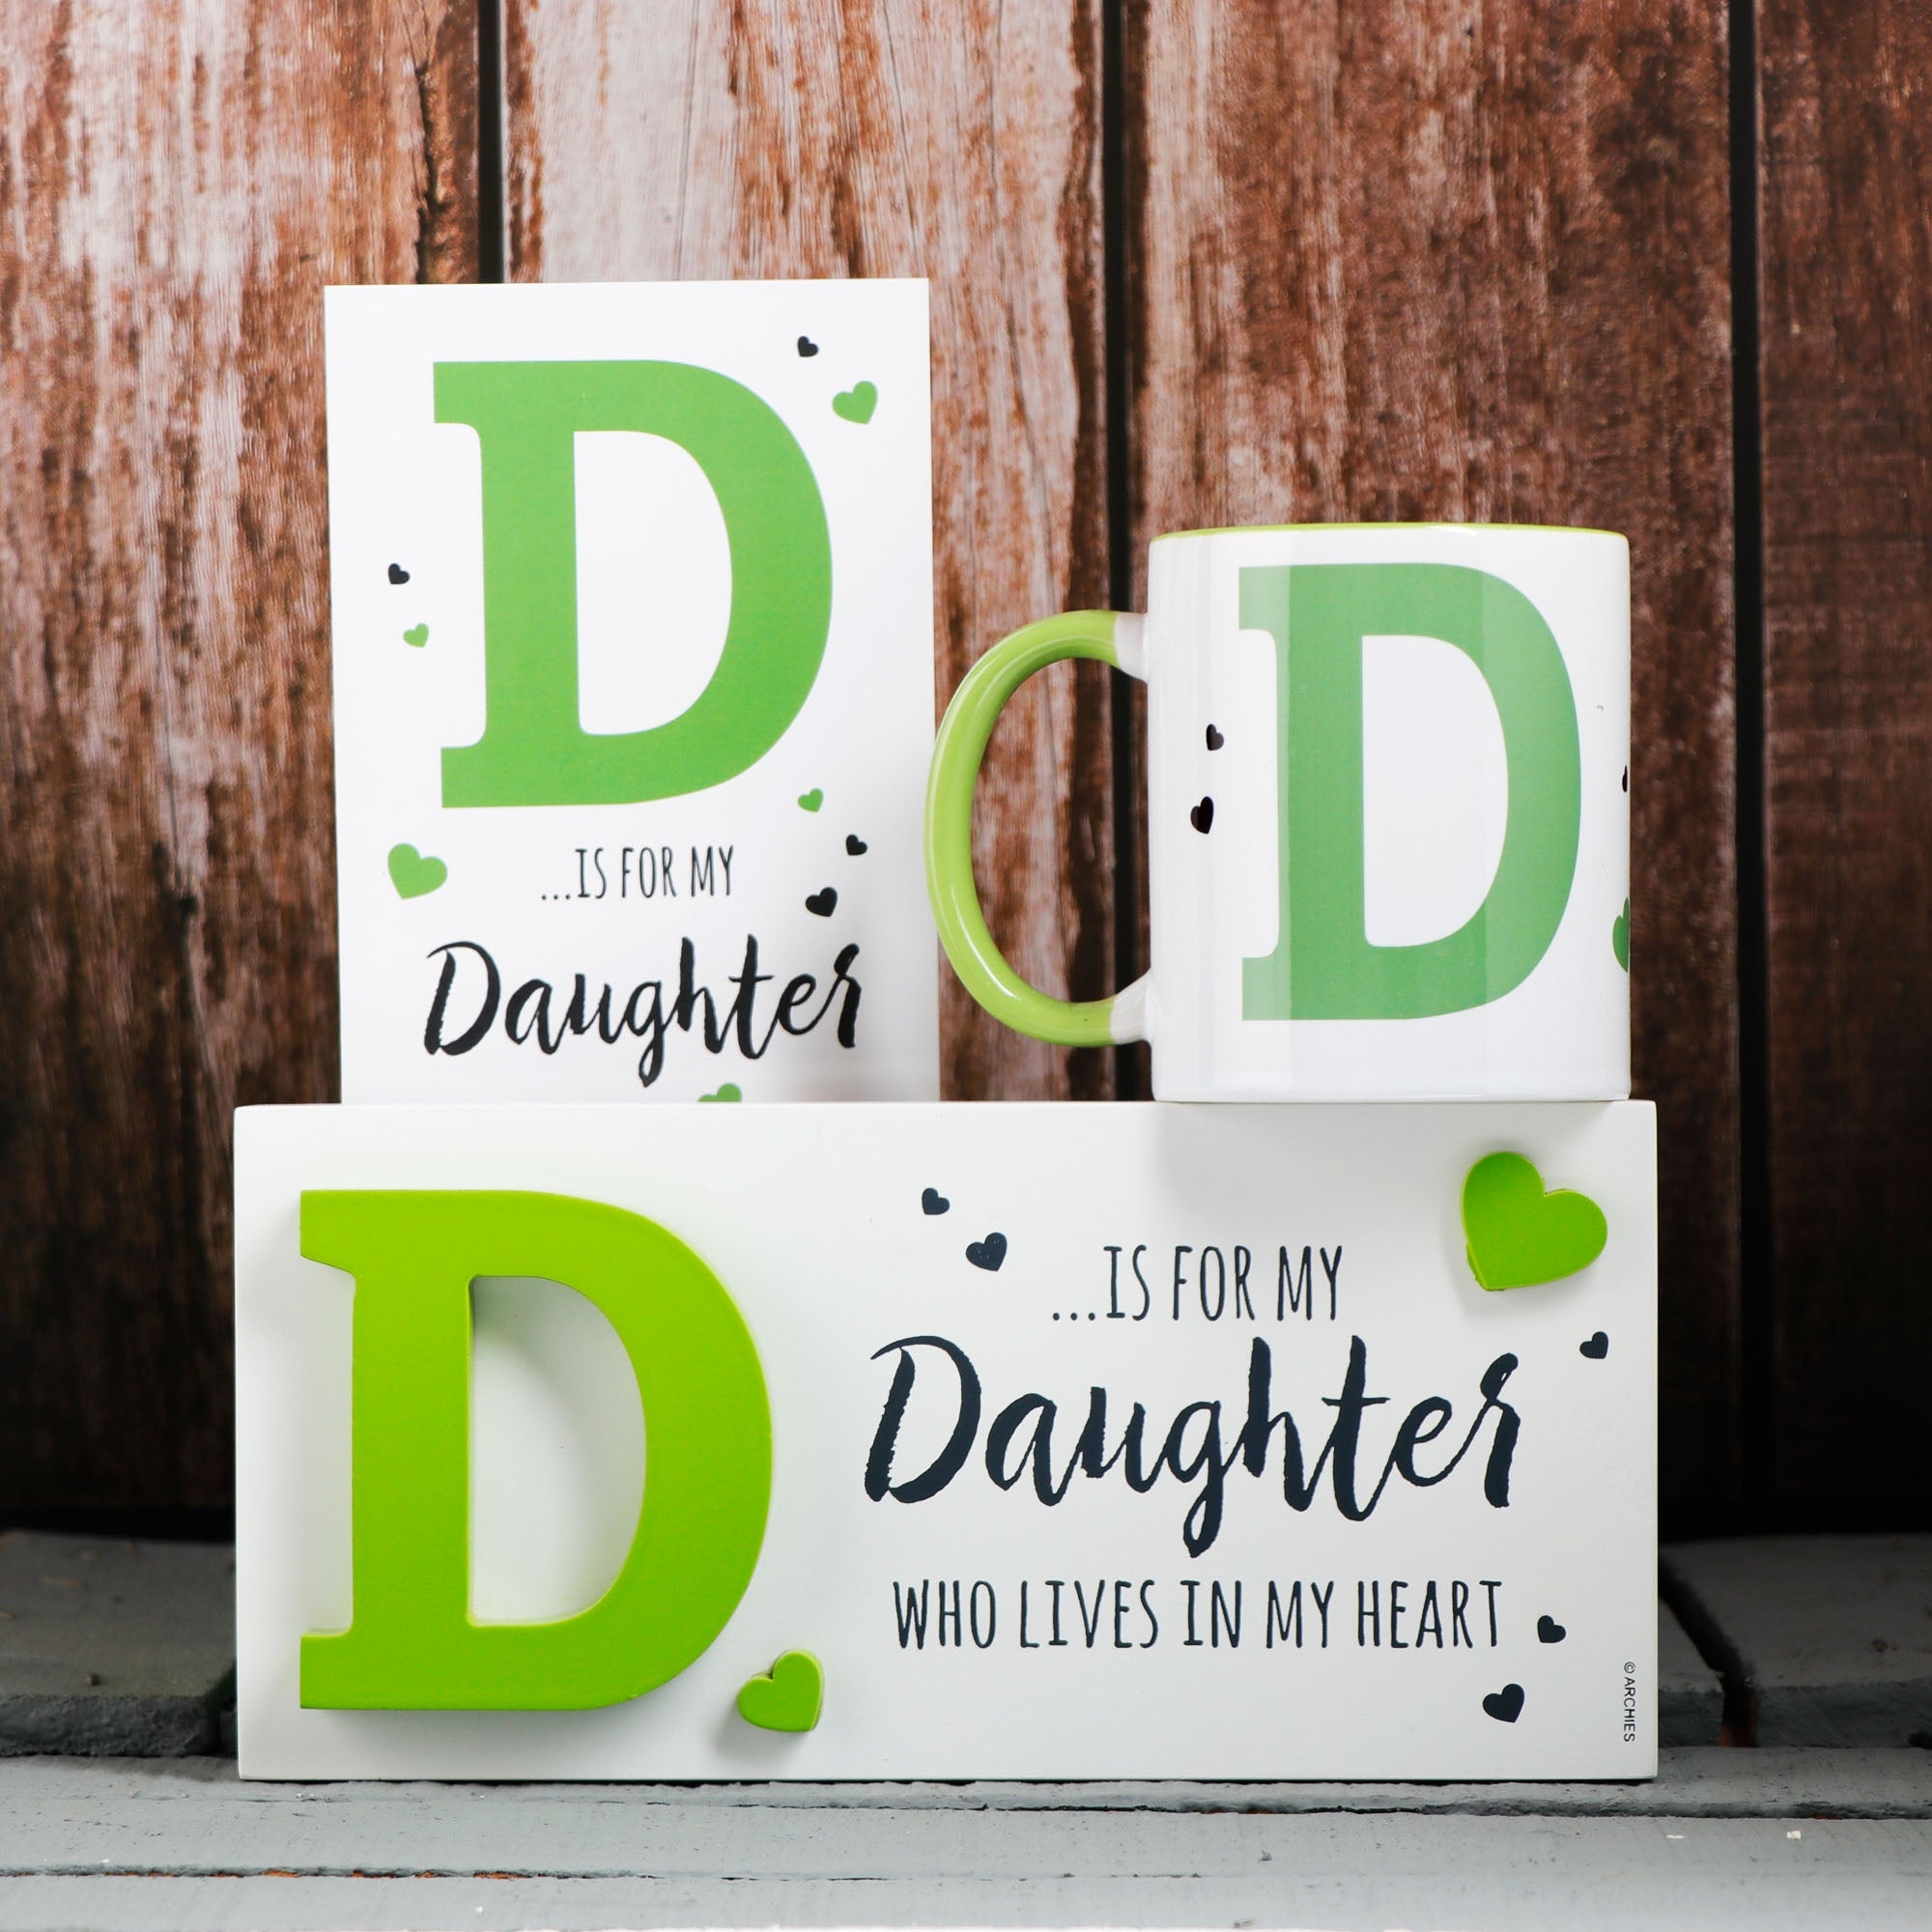 Archies | Archies KEEP SAKE Daughter Gift Combo with Ceramic Mug and Elevated Initial Quotation - with a FREE GREETING CARD